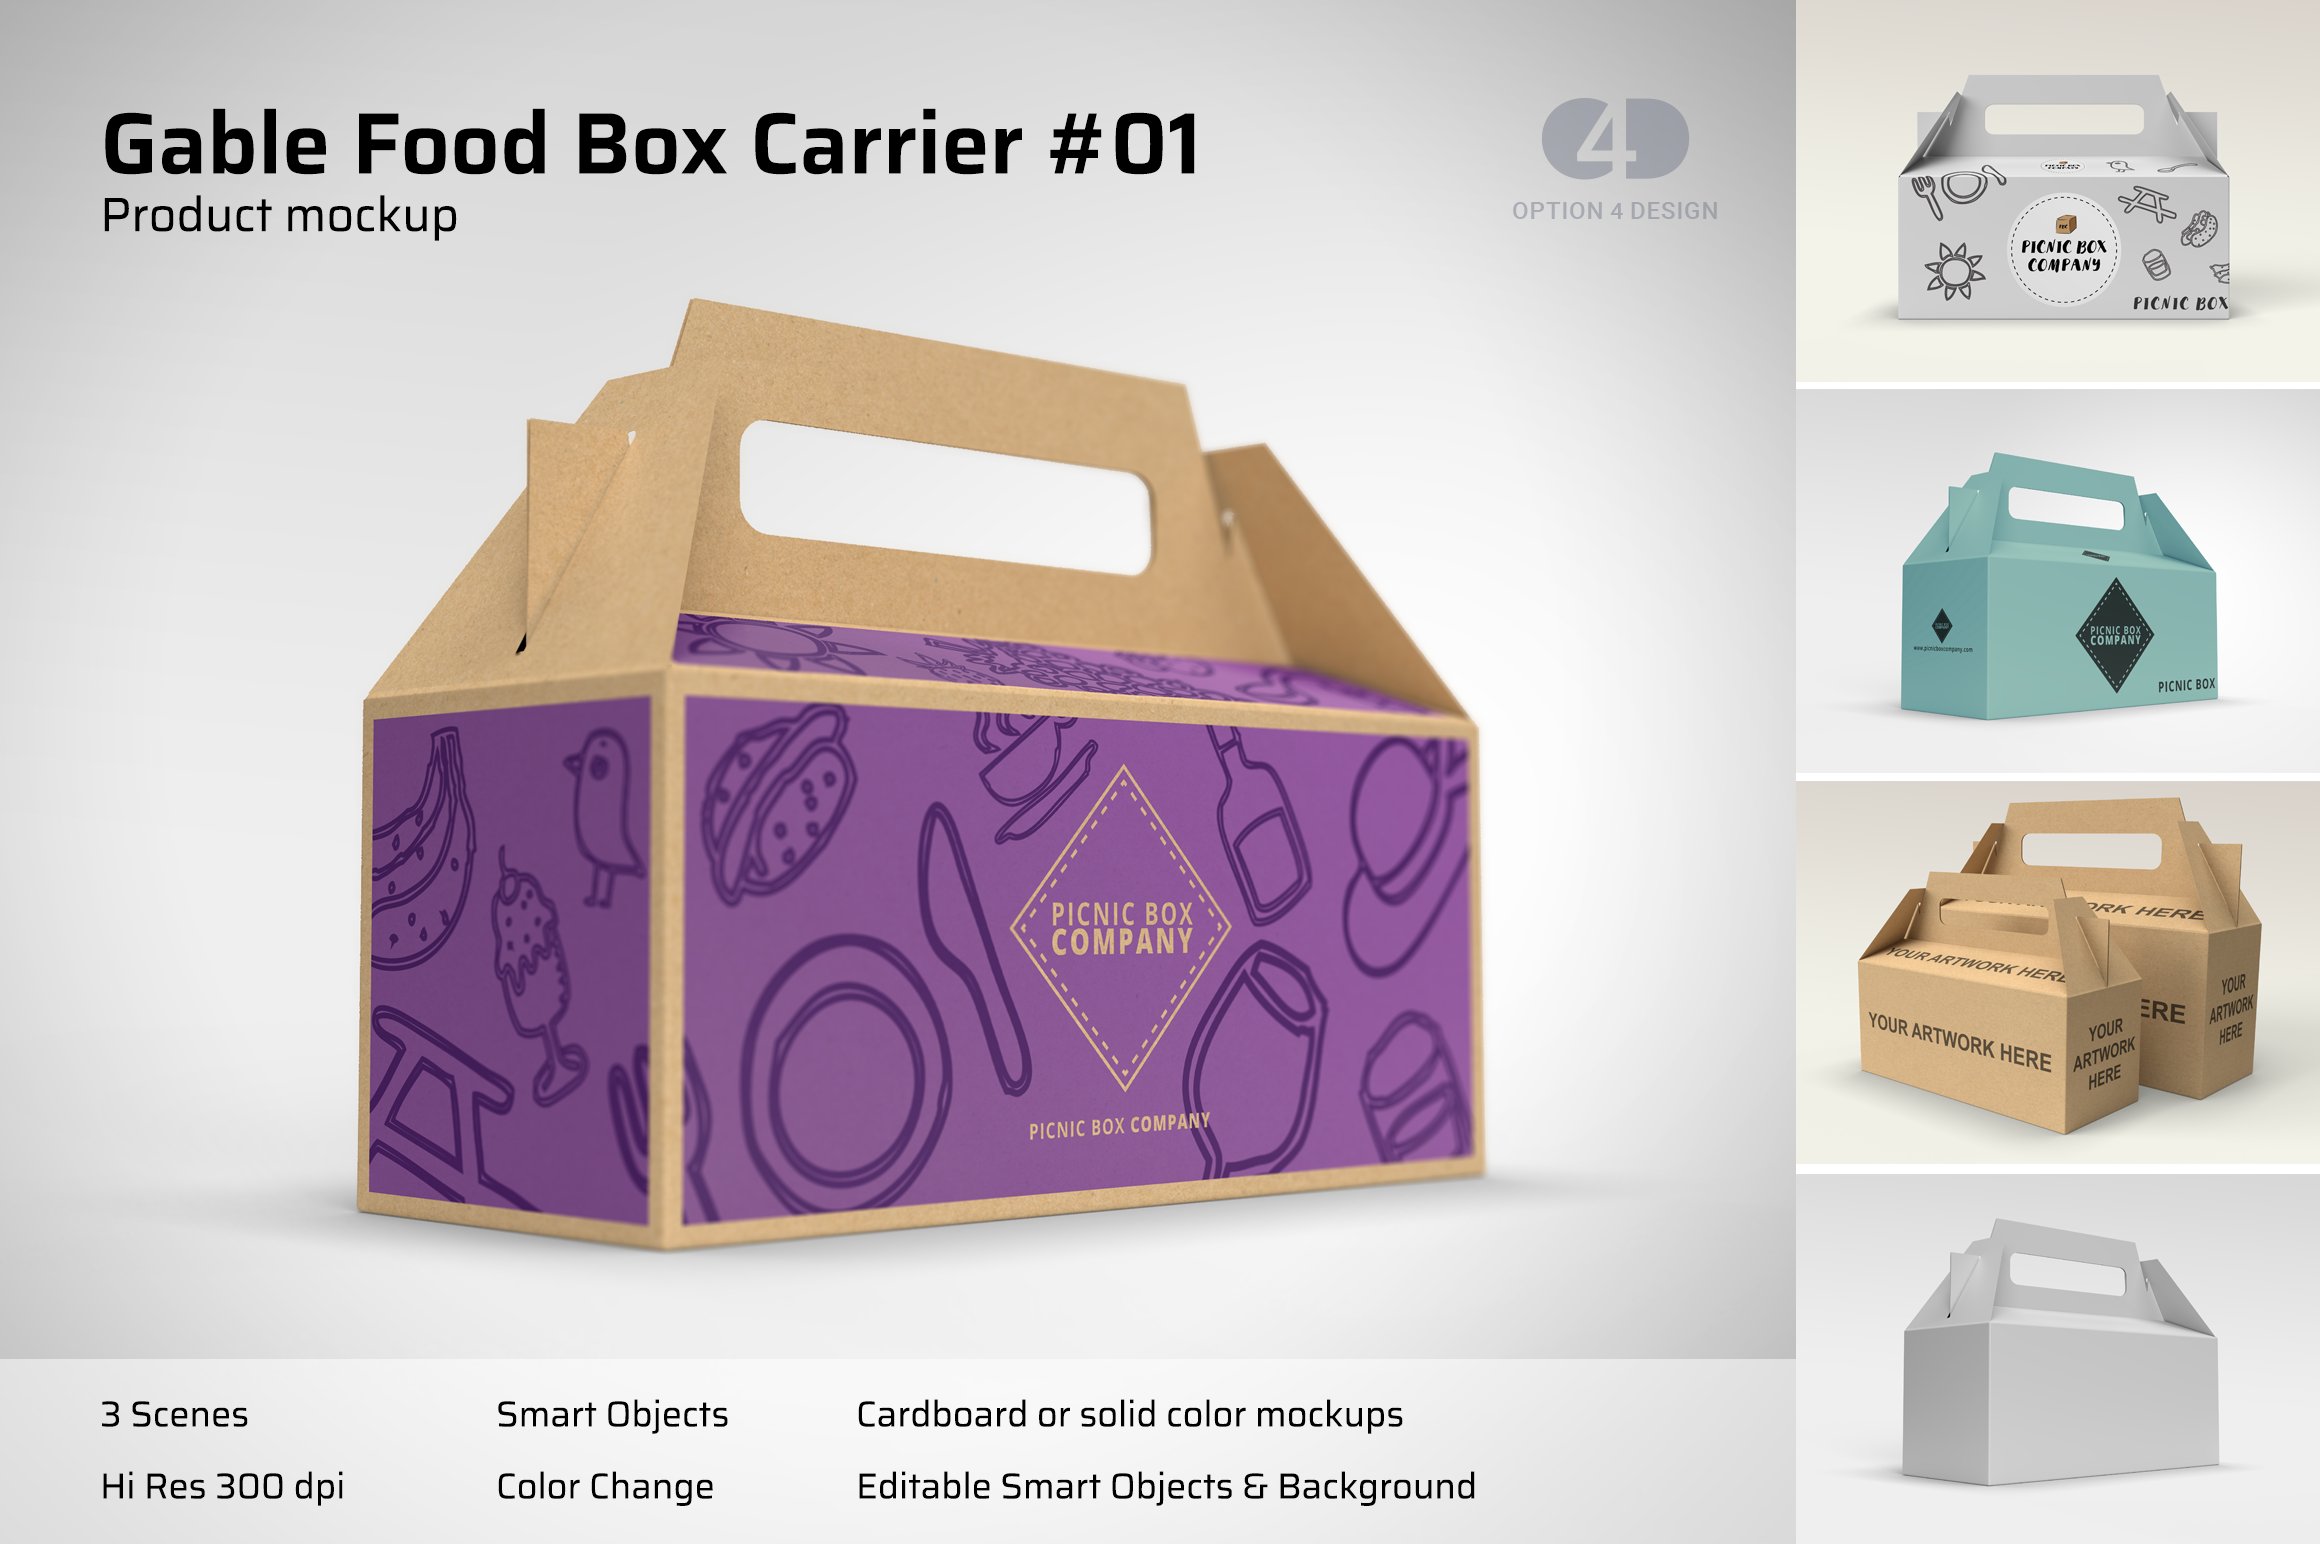 Gable Food Box Carrier Mockup #01 cover image.